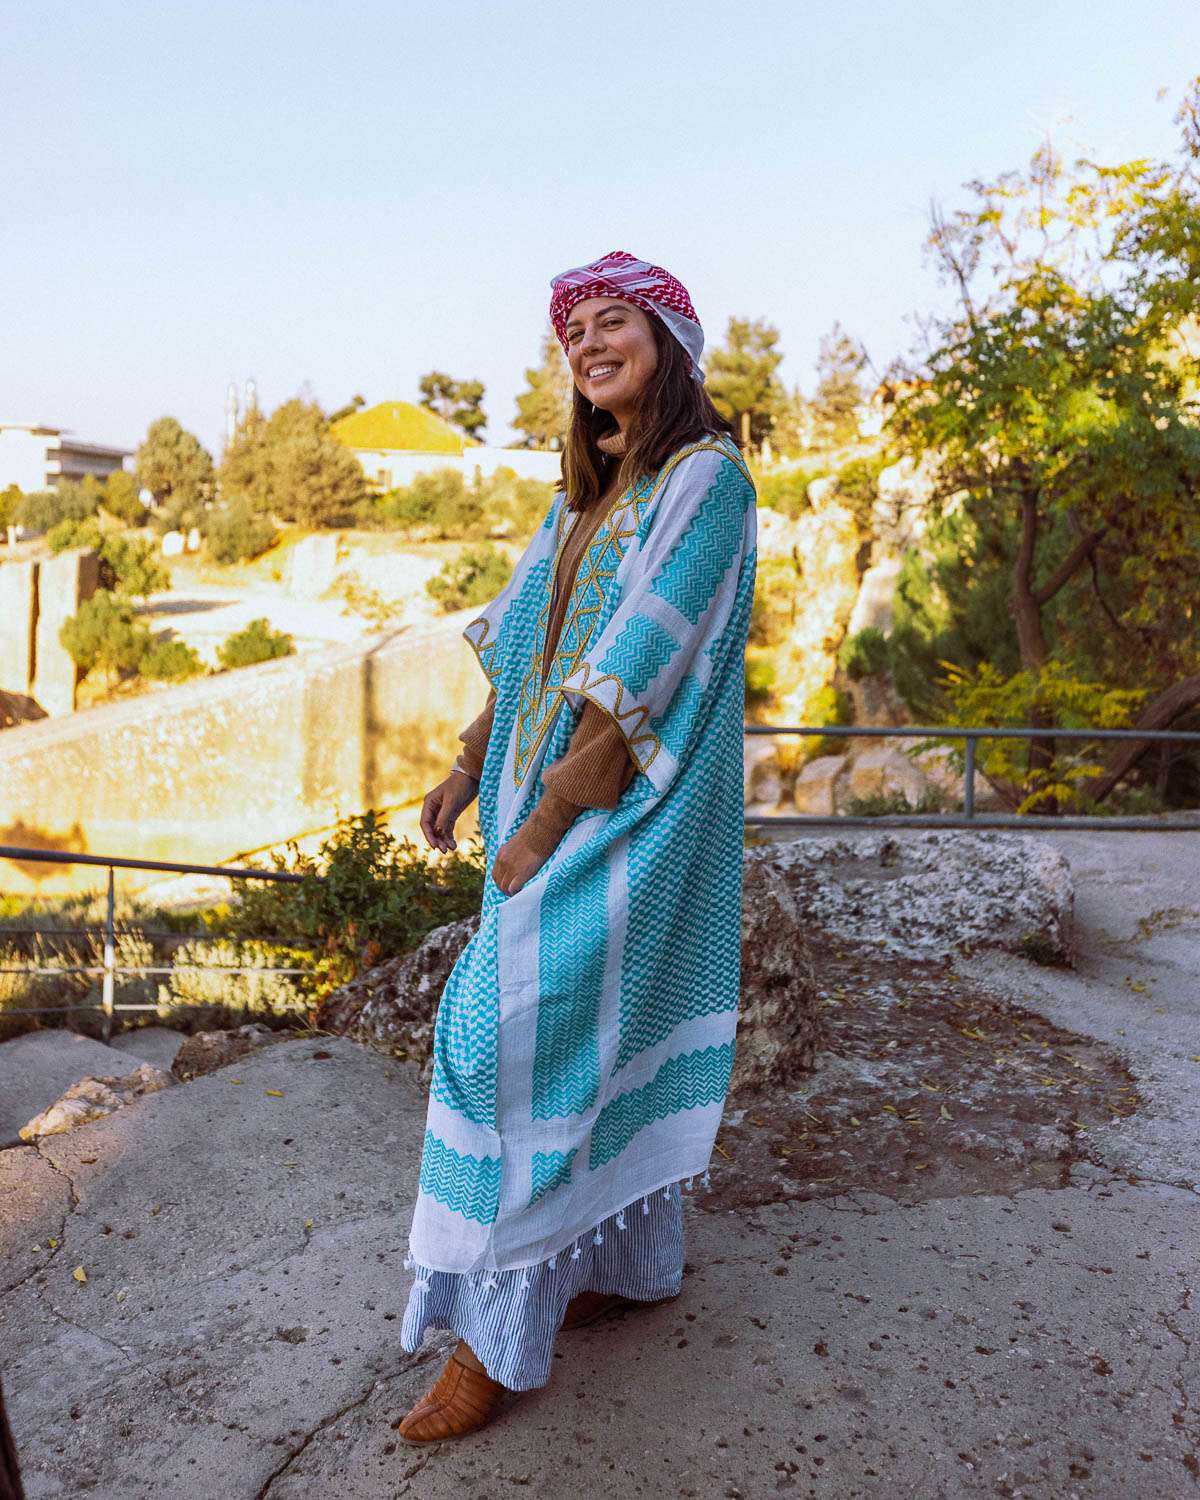 Rachel Off Duty: Trying on Traditional Clothing from Lebanon